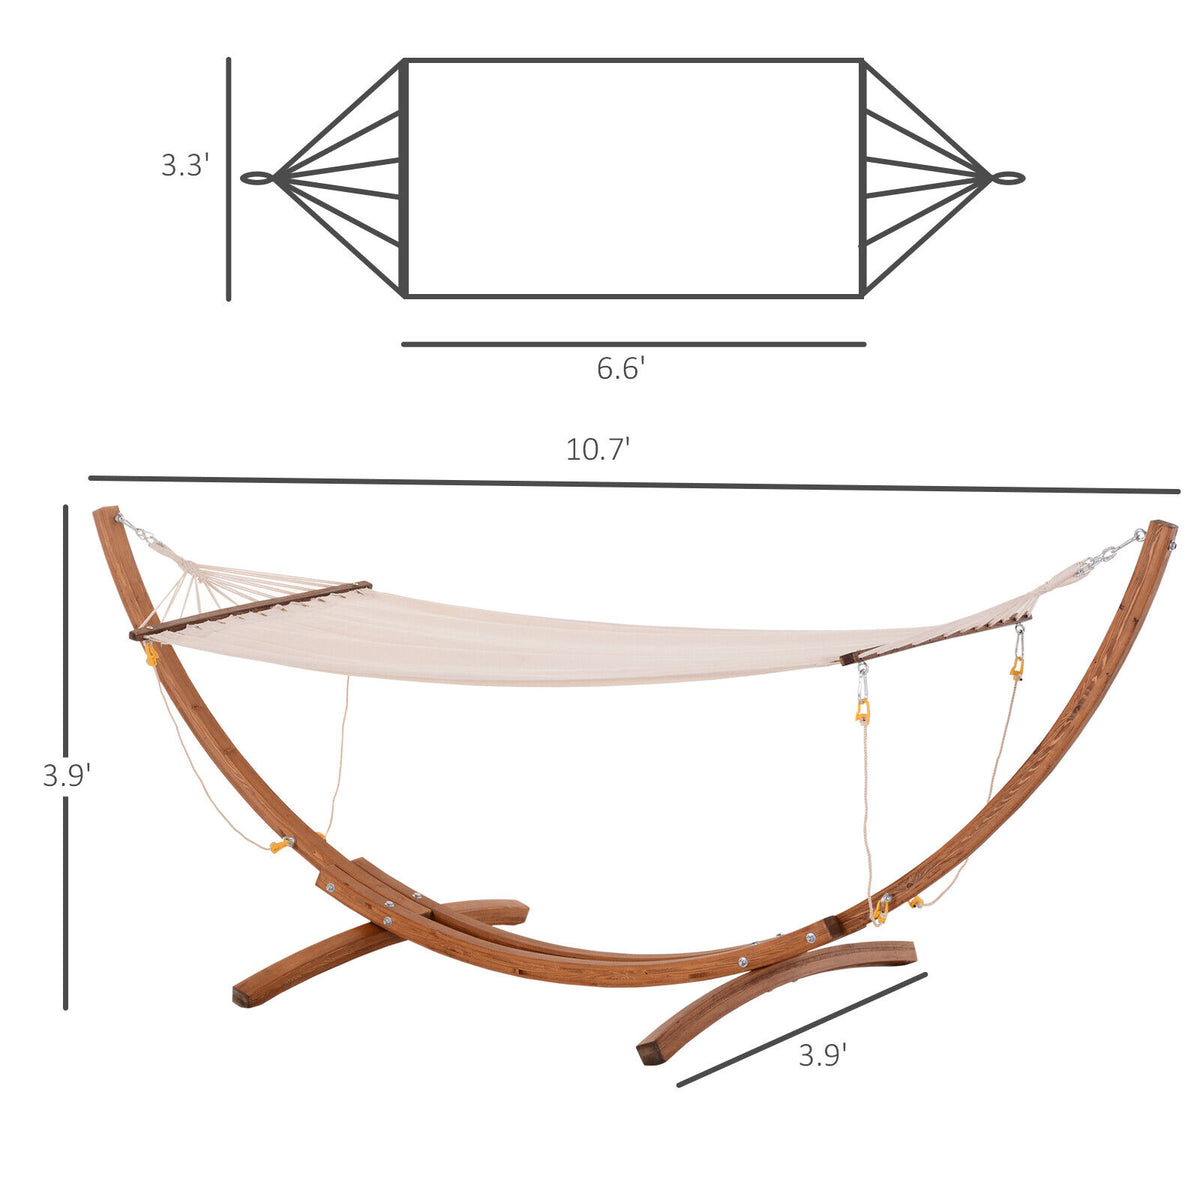 Cotton Hammock With Wooden Stand Outdoor Swing For Patio Porch Garden